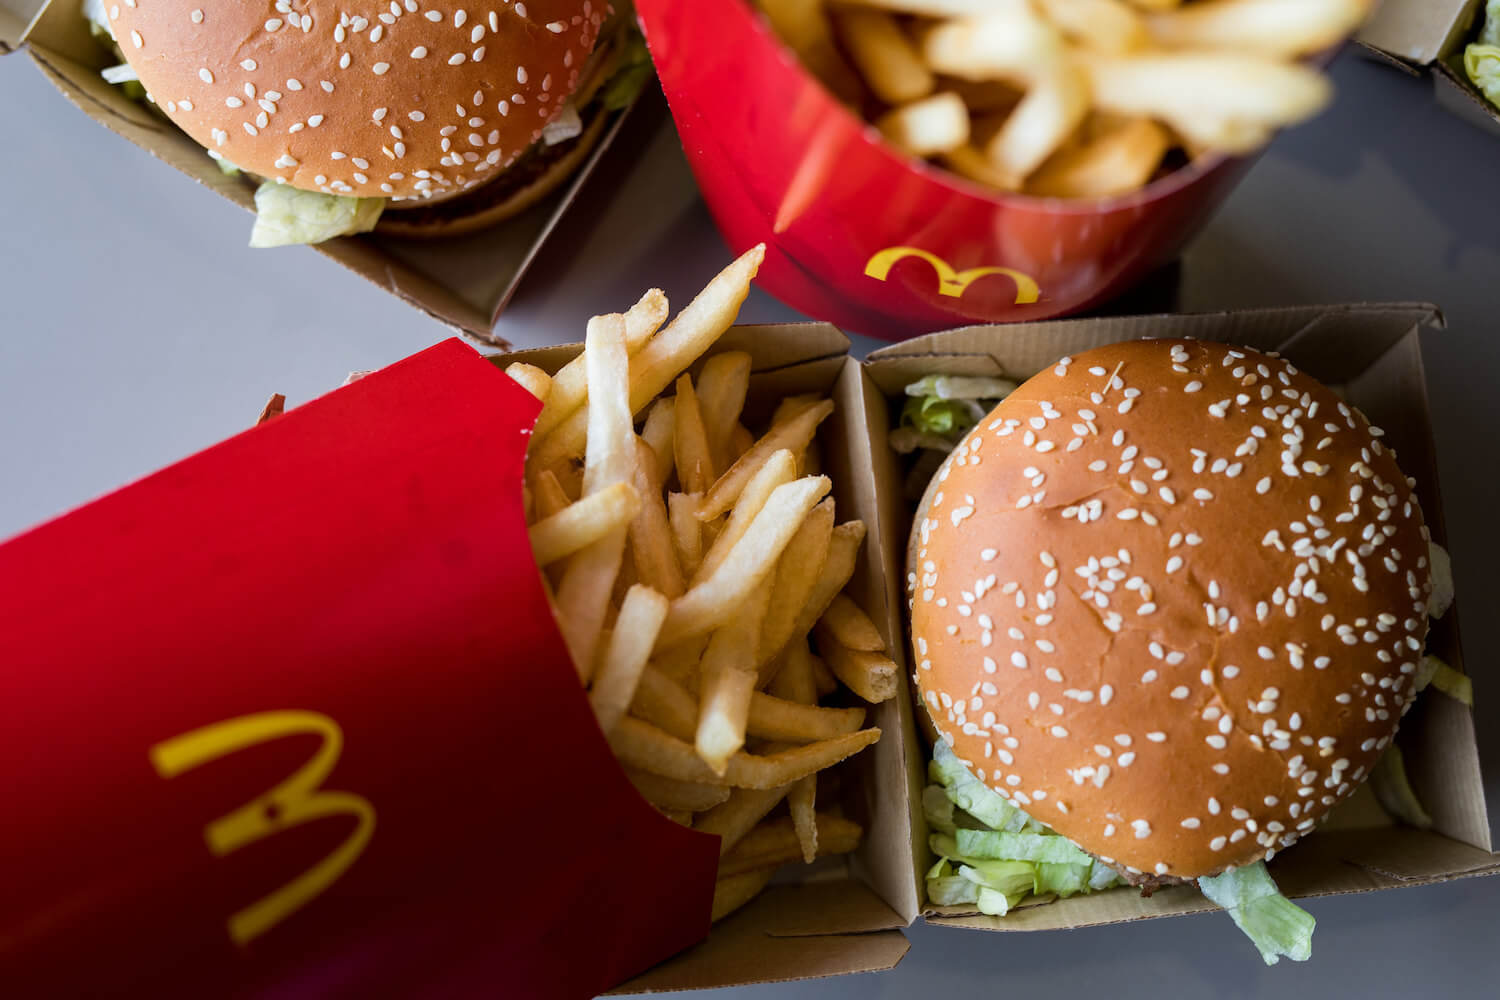 Food packaging at Burger King, McDonald's, and Wendy's found to contain  "forever chemicals"